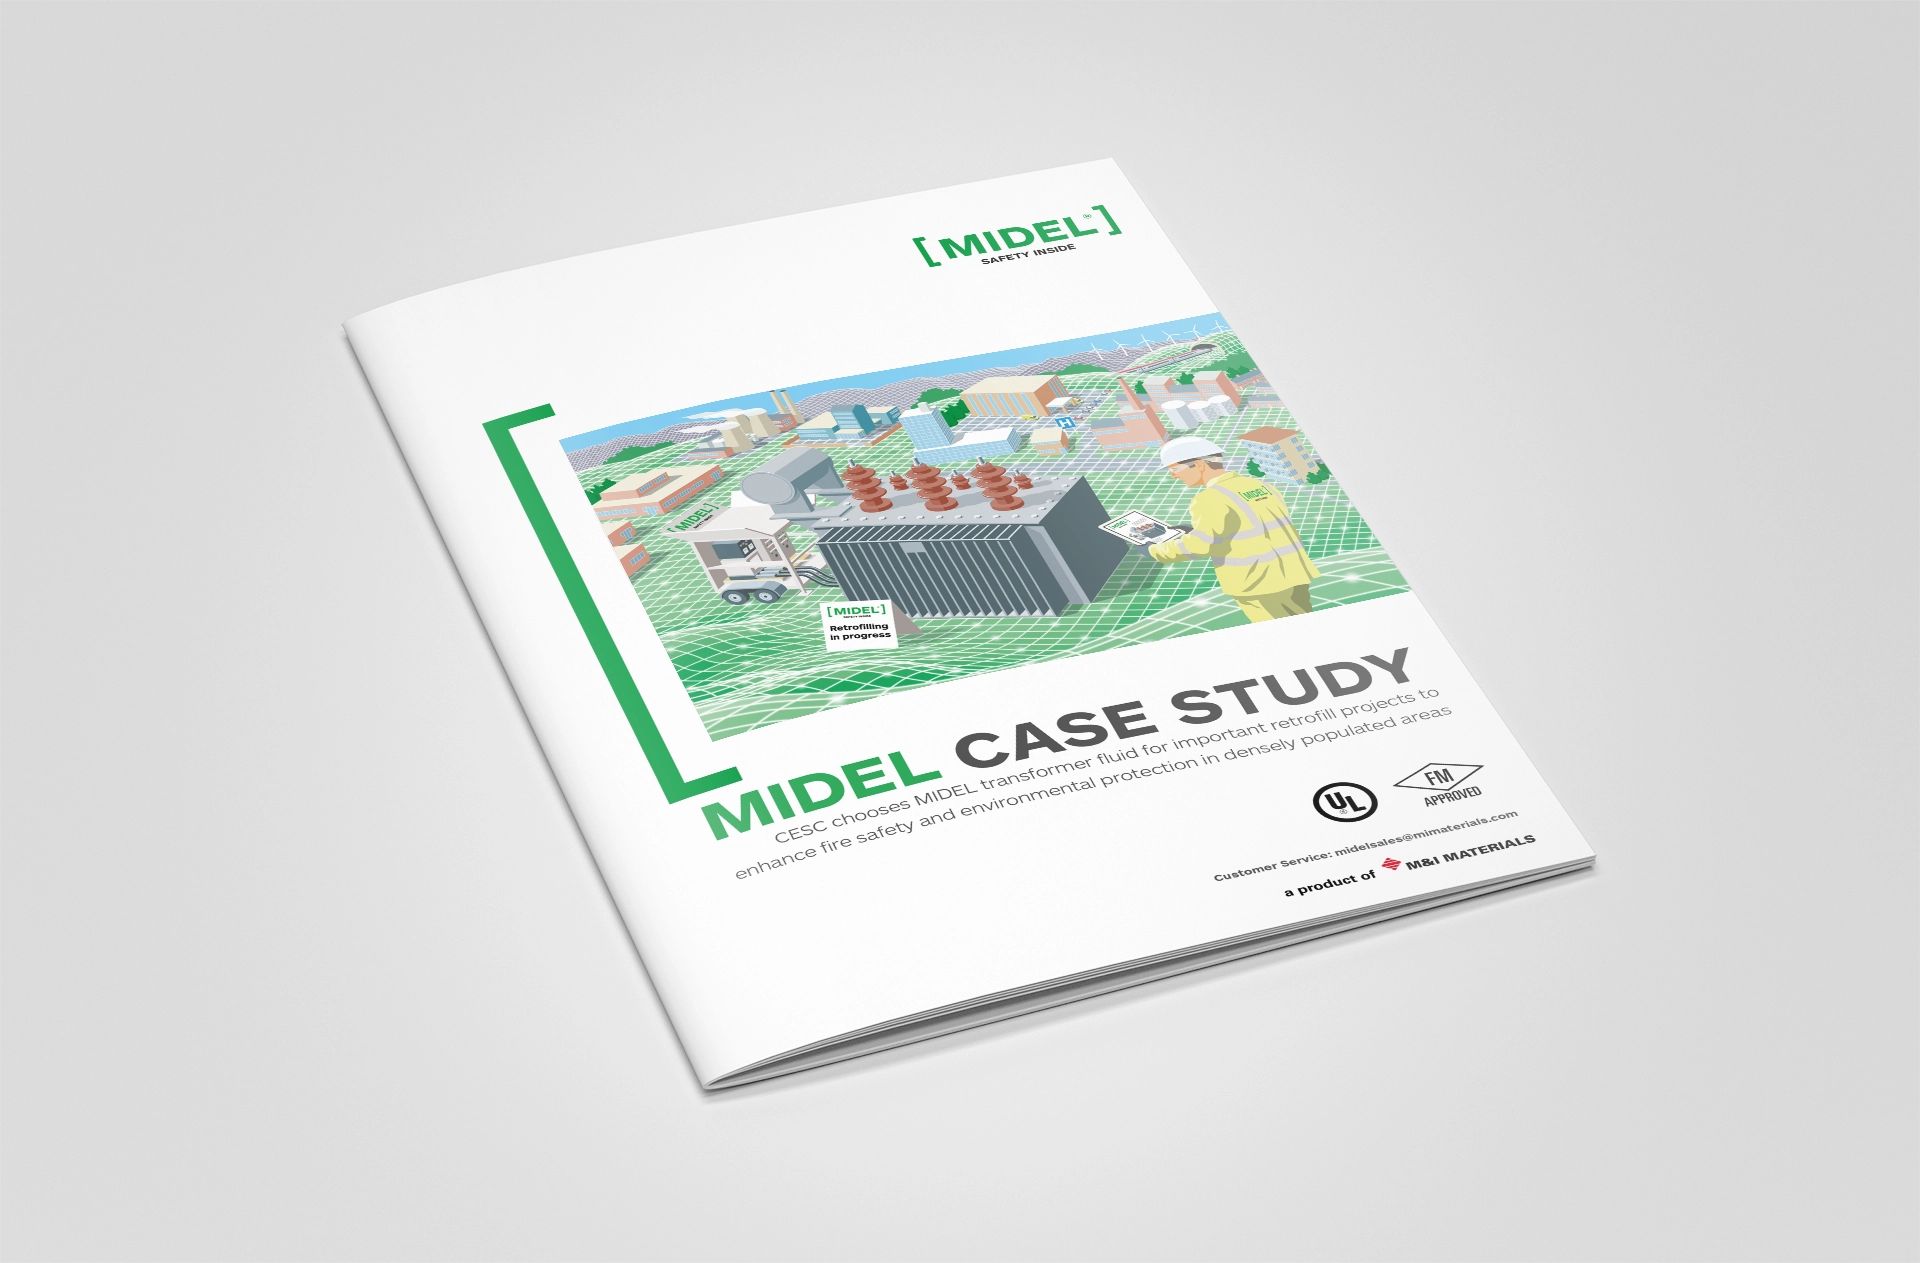 MIDEL case study front cover